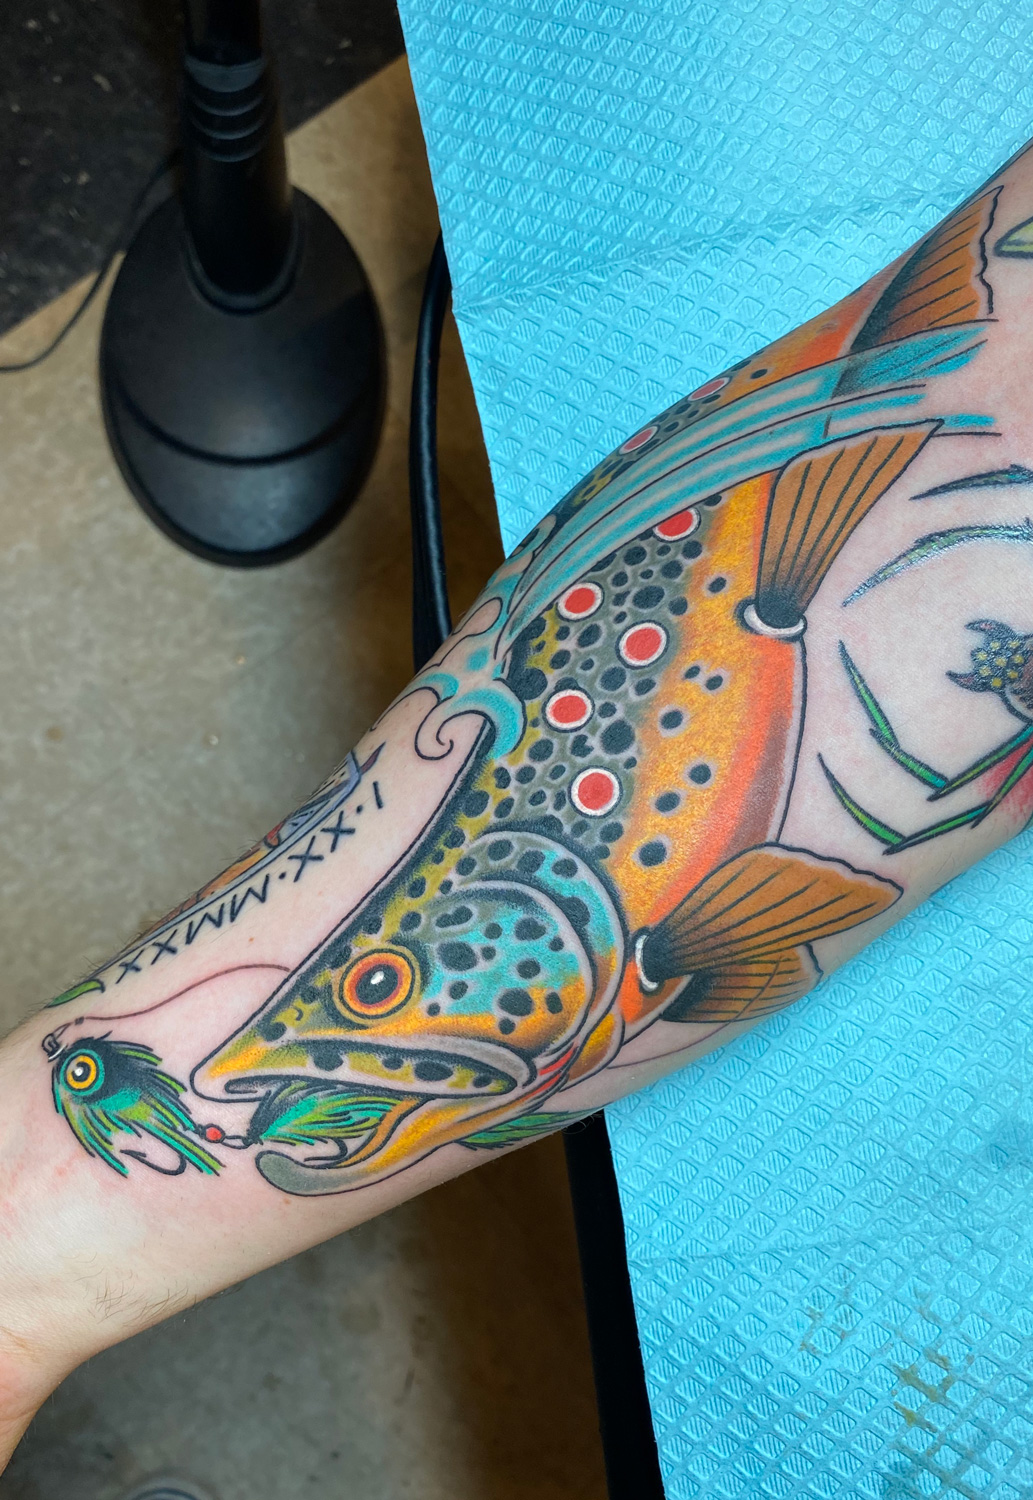 Tattoo uploaded by Chris Hurtsville  Trout tattoo chrishurtsville  fishtattoo naturetattoo  Tattoodo